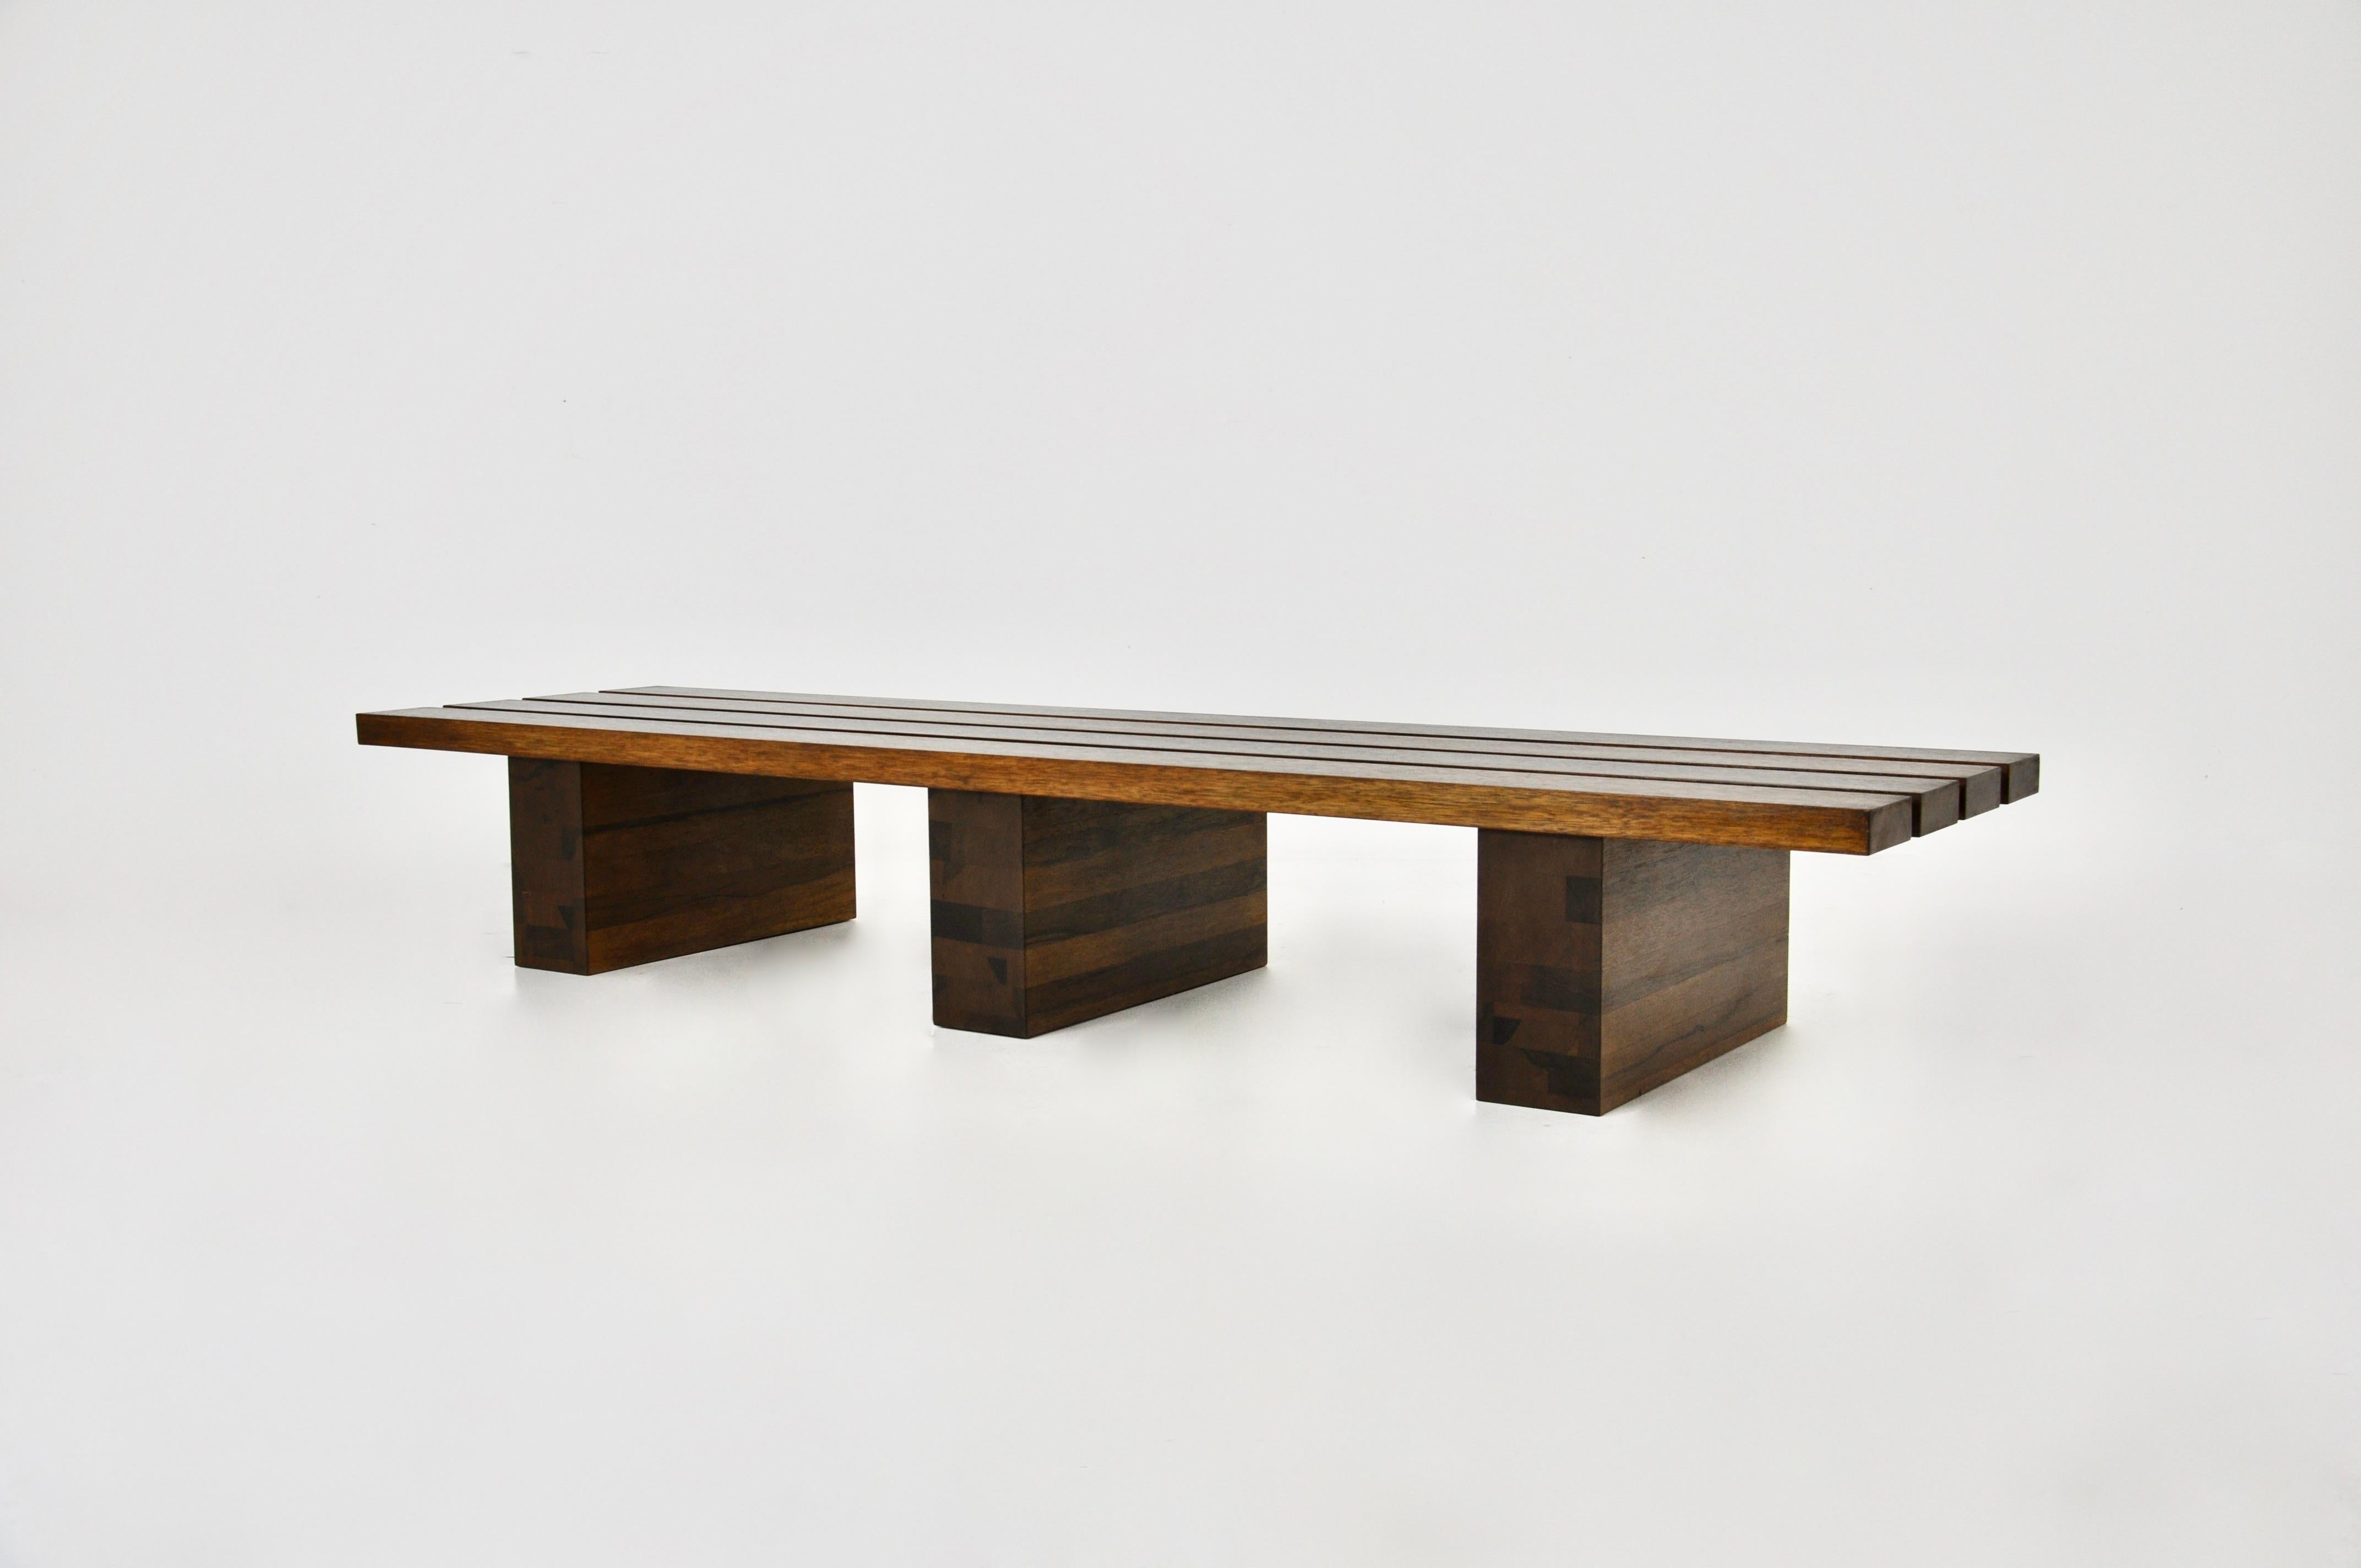 Wooden bench made by an Italian craftsman in the 1950s. Wear due to time and age of the bench.